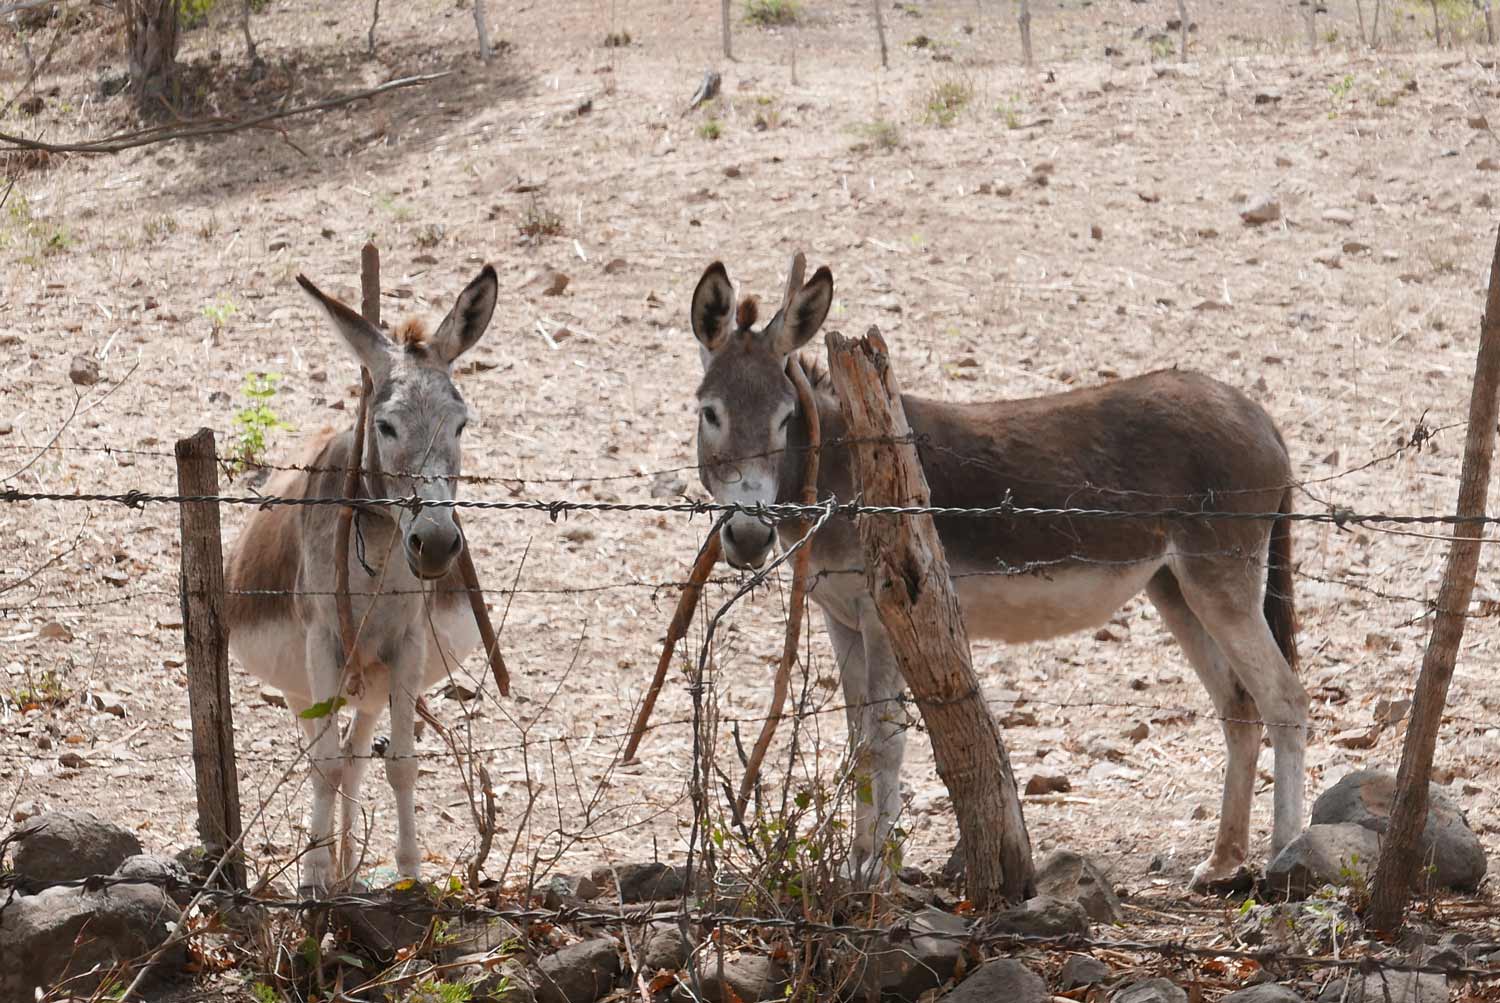 Two donkeys in the valley before entering the rear of Somoto canyon